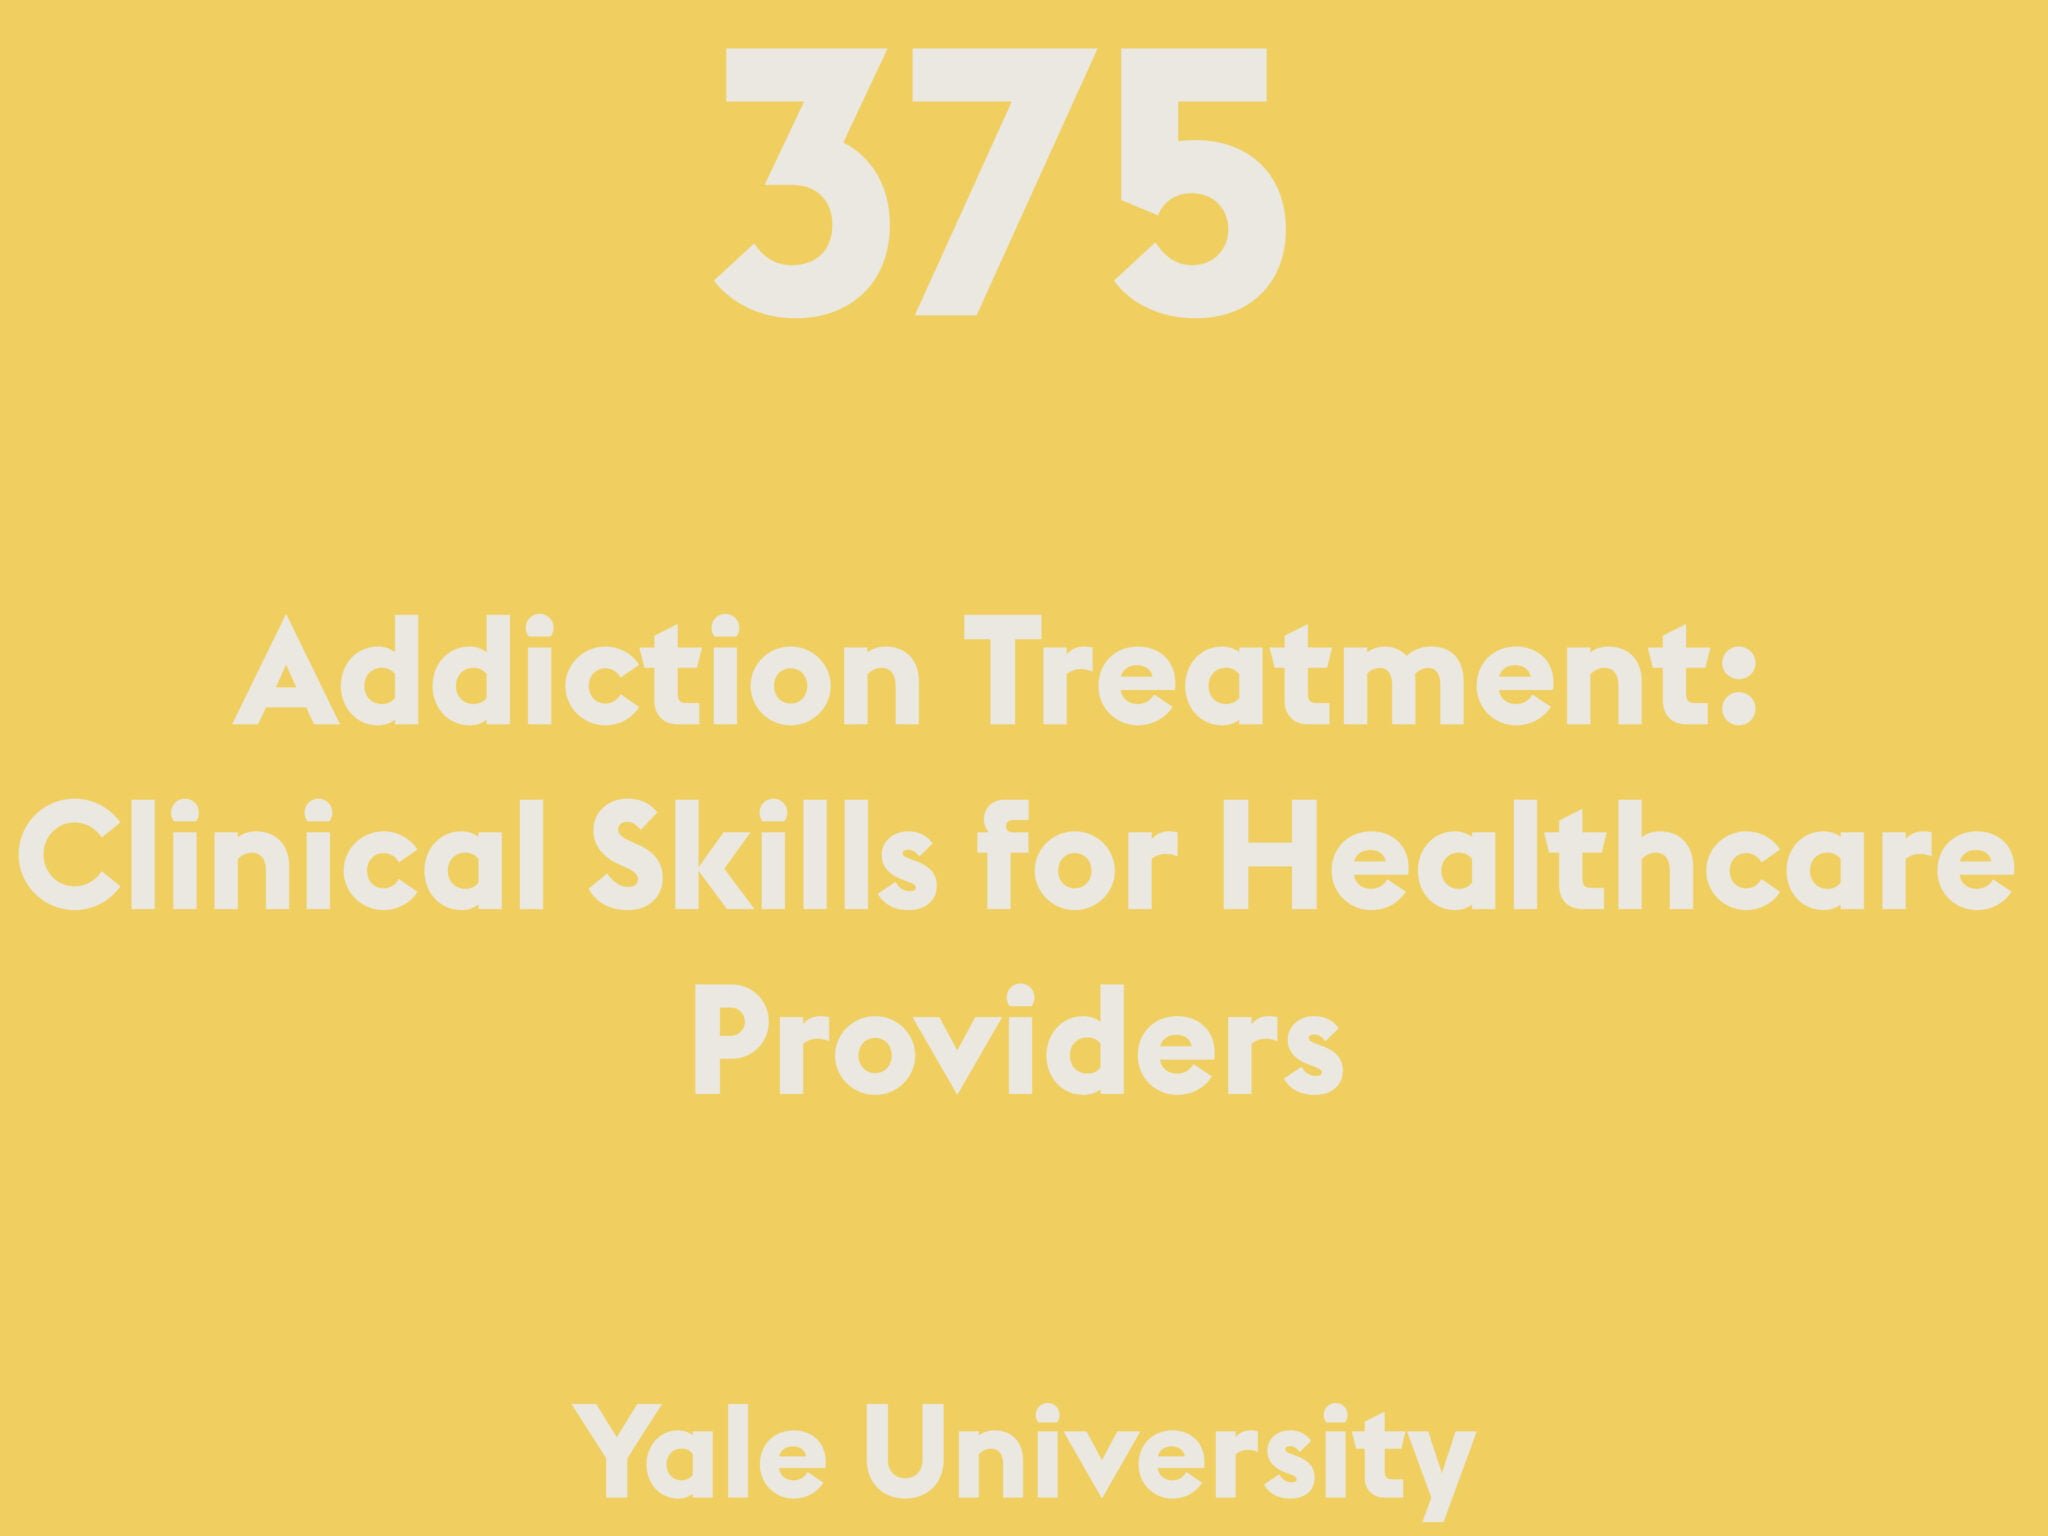 Addiction Treatment: Clinical Skills for Healthcare Providers